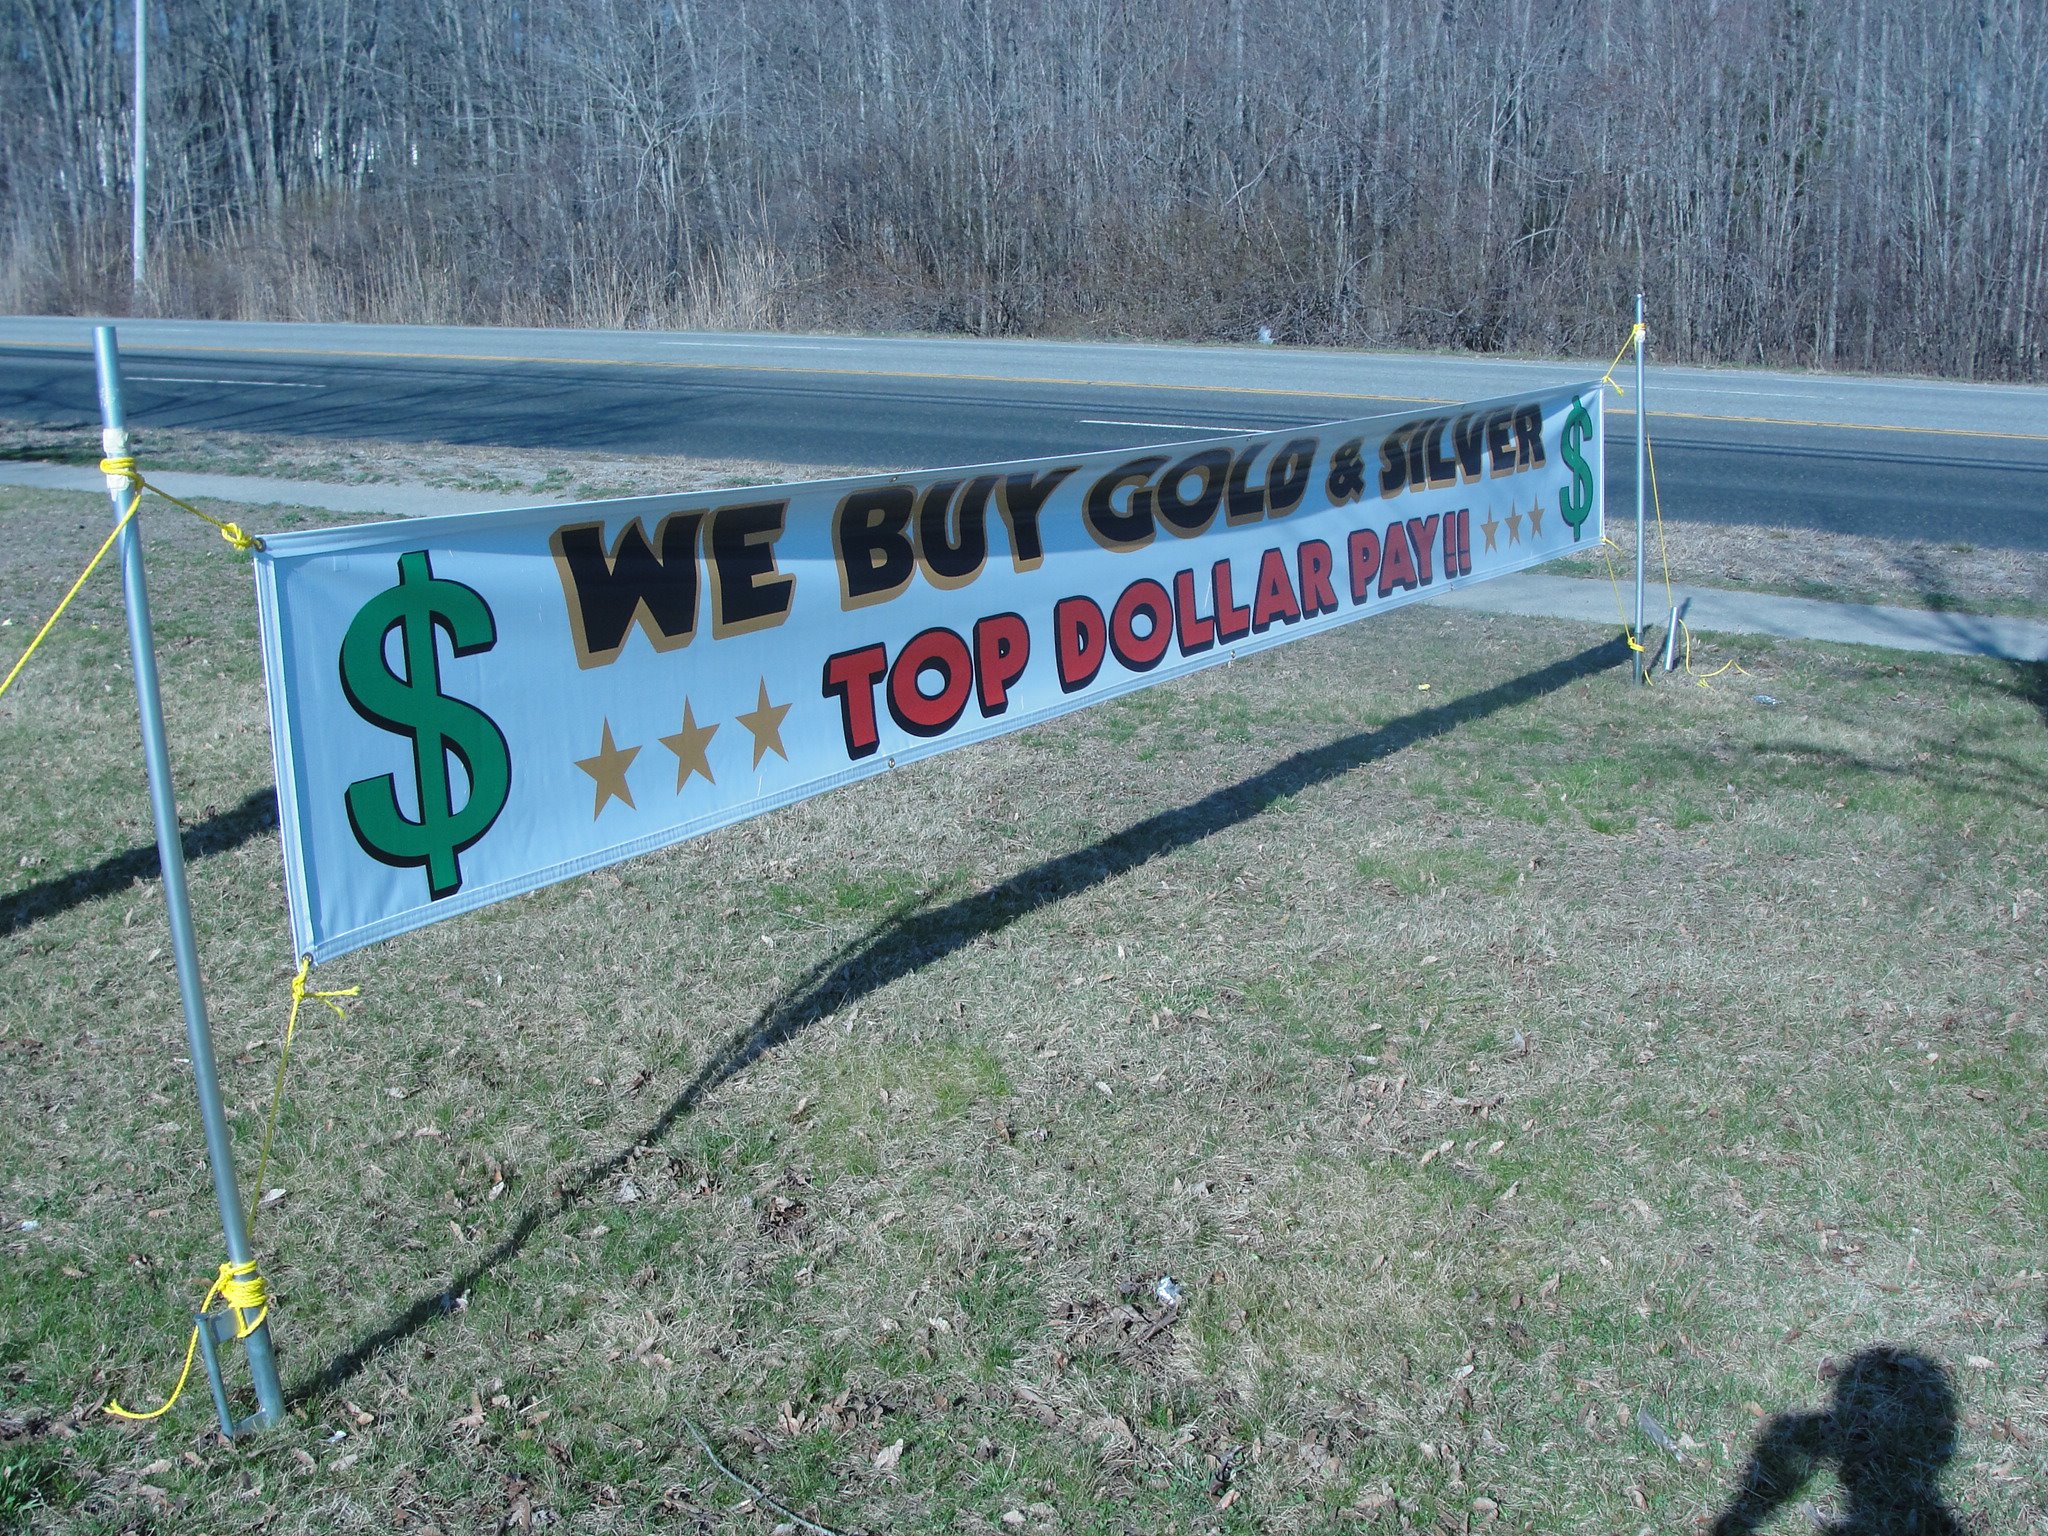 We pay top dollar for precious metals!